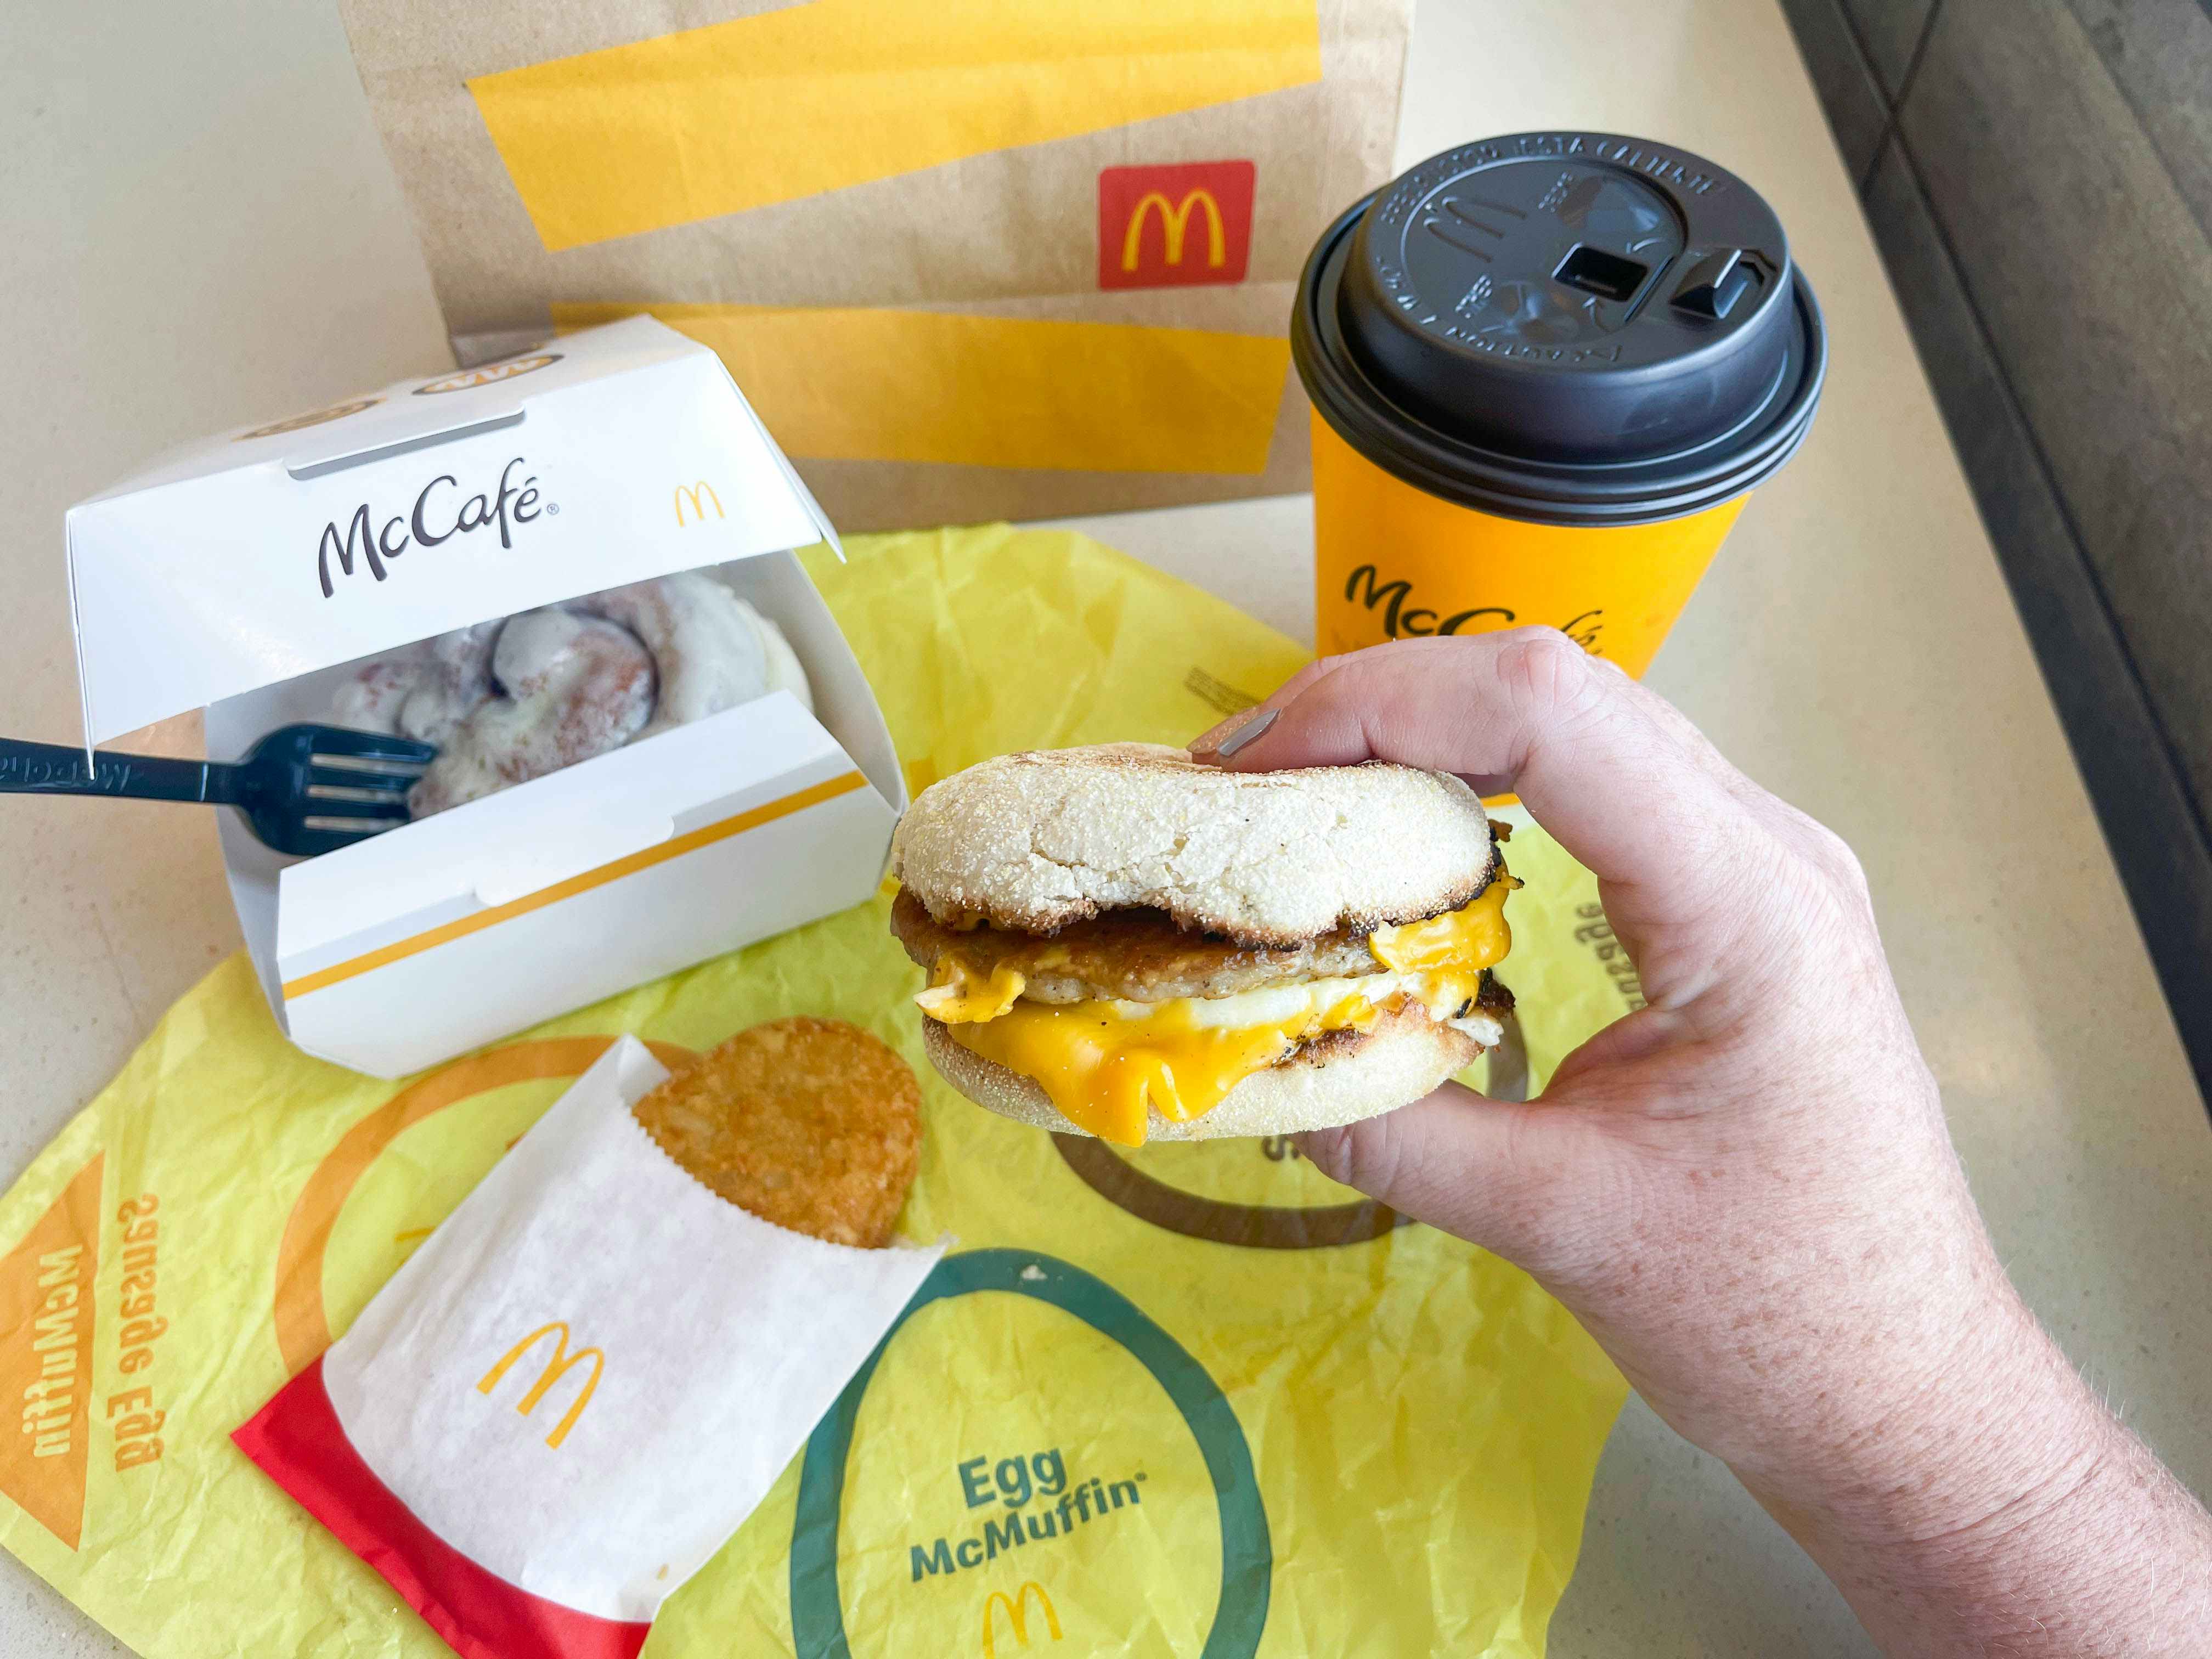 person holding mcdonalds breakfast items at table